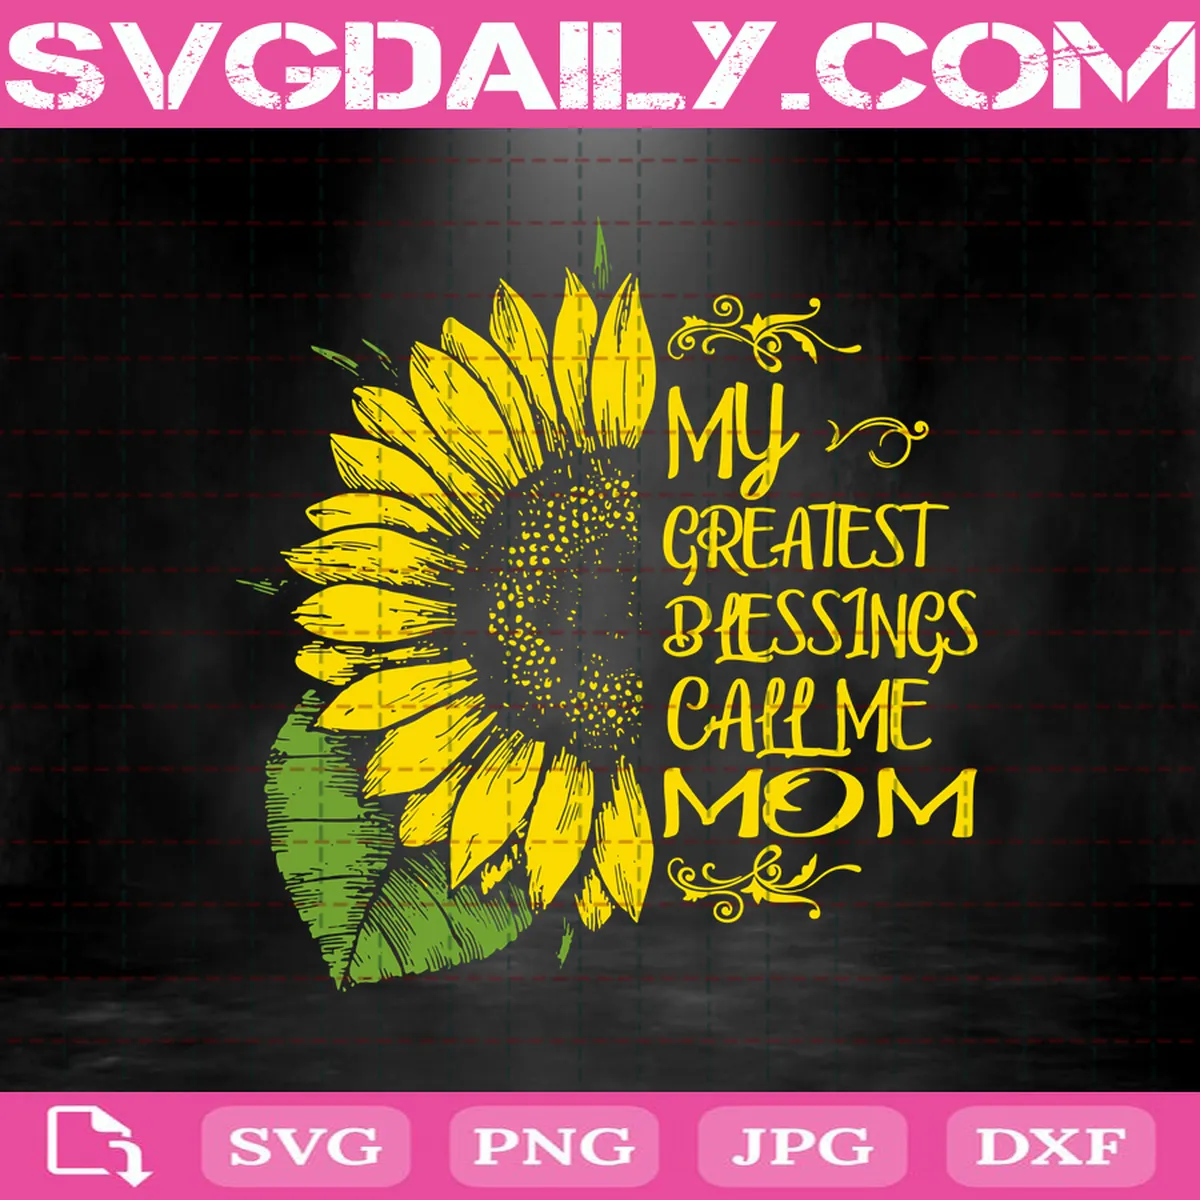 My Greatest Blessings Call Me Mom Svg, Sunflower Mom Svg, Part Of Sunflower Svg, Sunflower Svg, Mother’s Day Svg